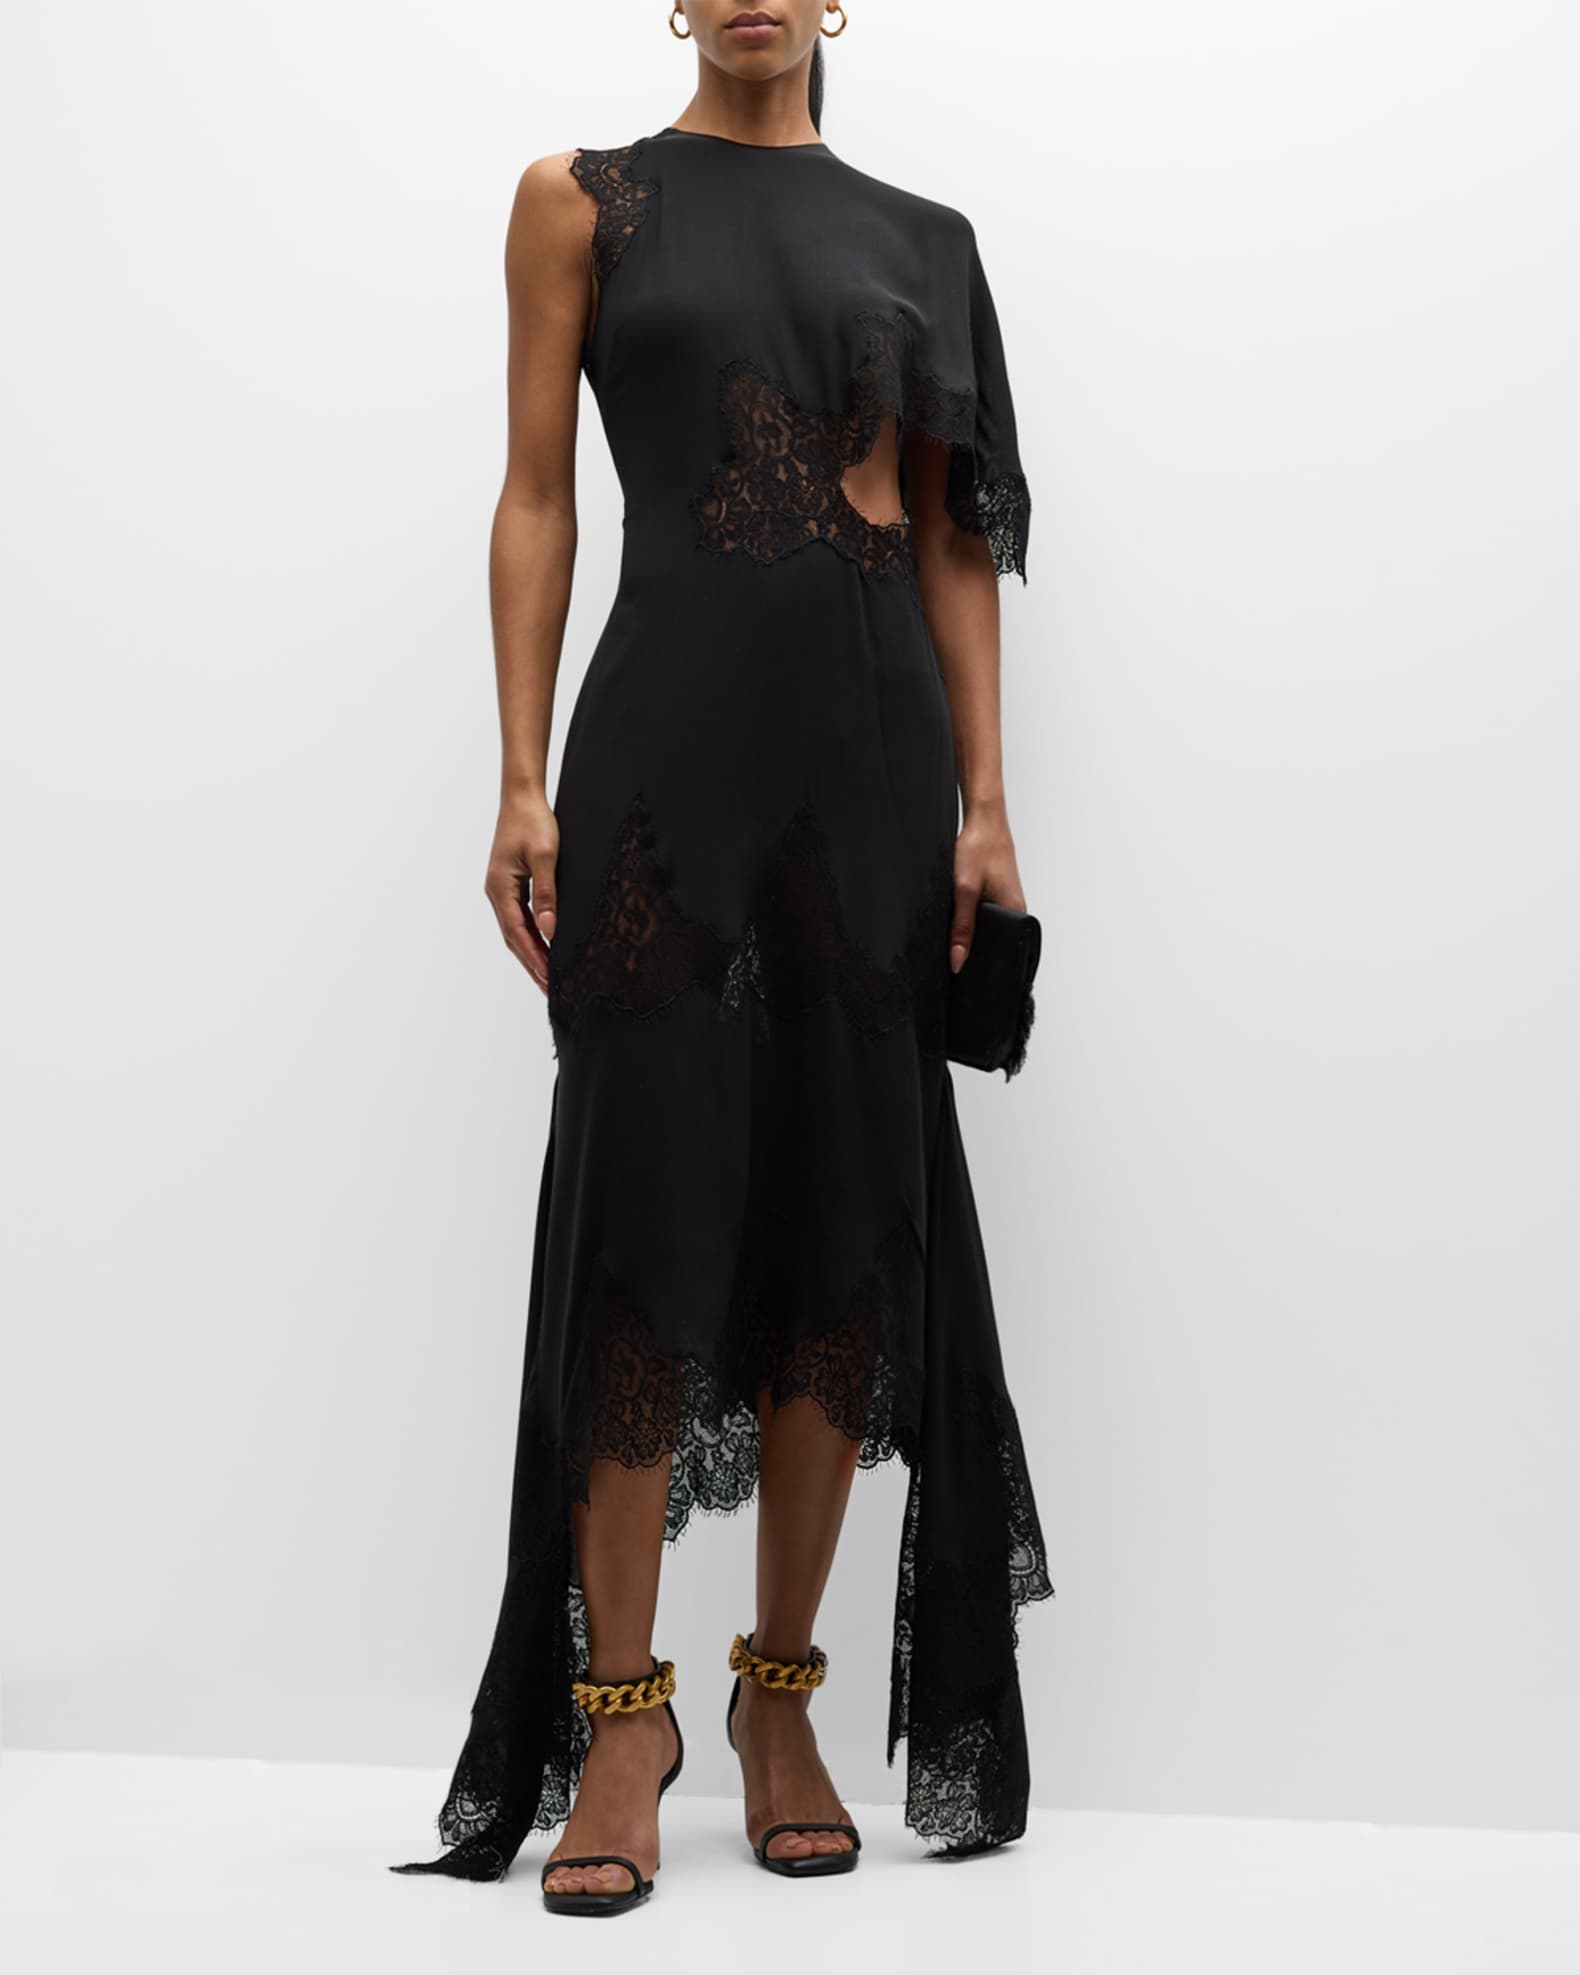 Stella McCartney One-Shoulder High-Low Dress with Lace Detail | Neiman ...